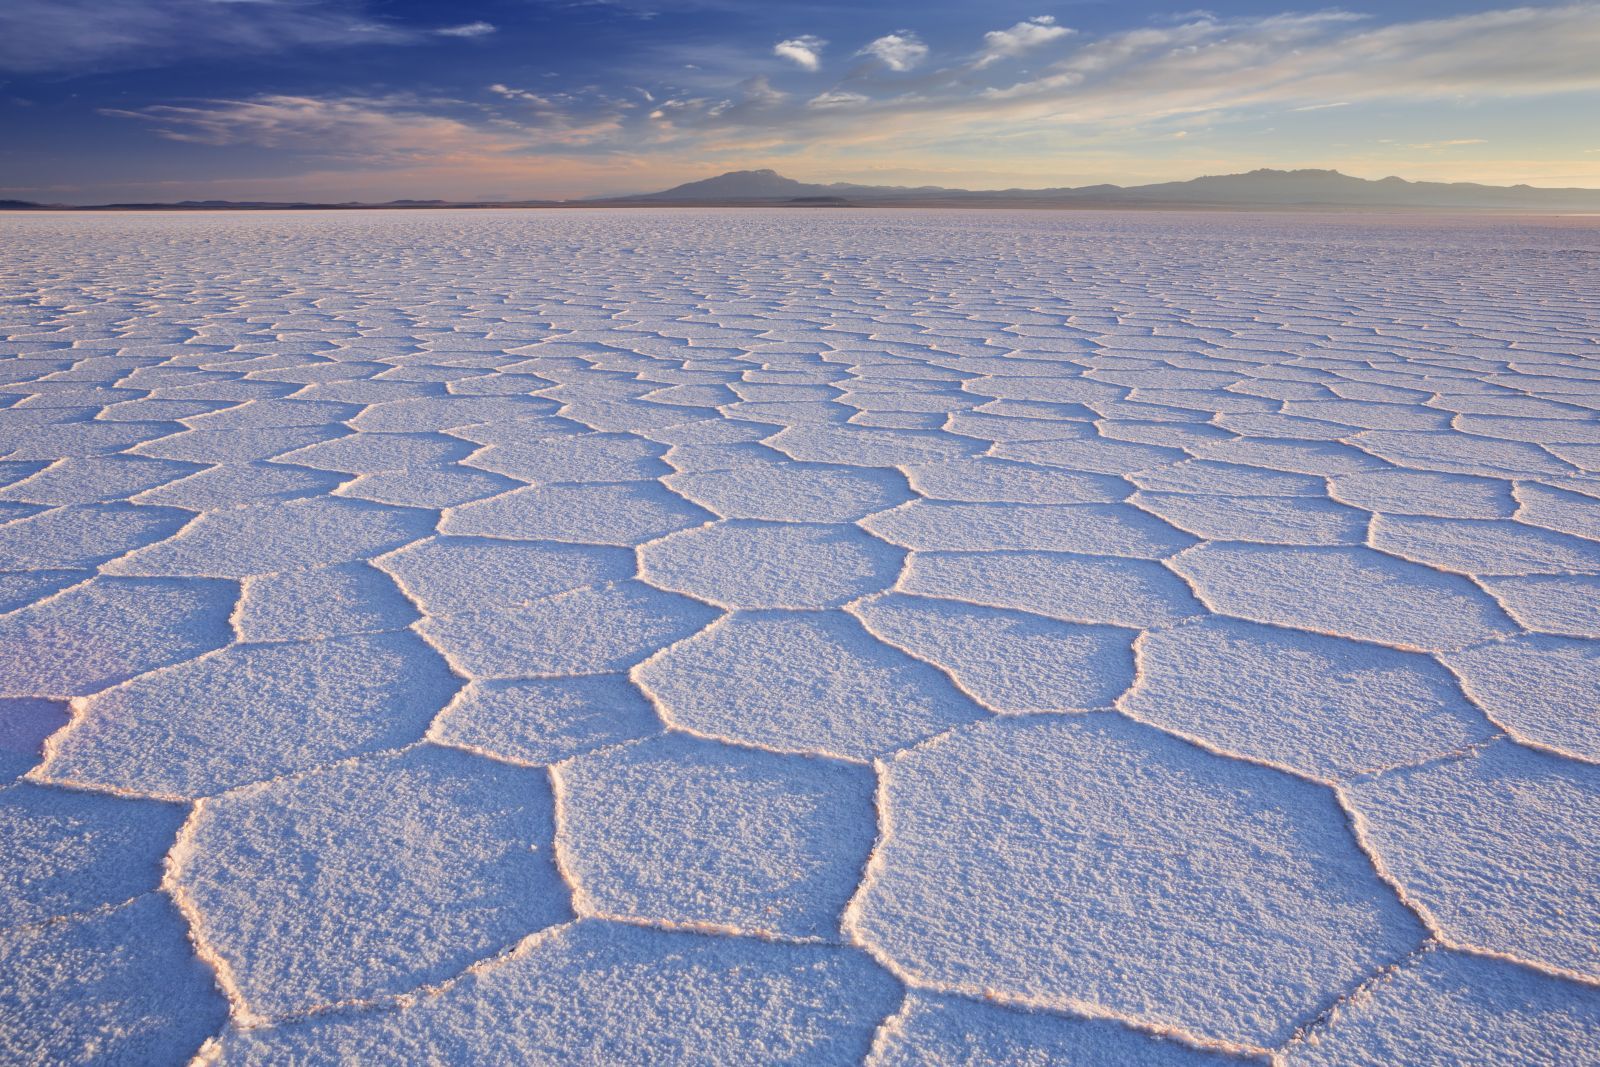 A wide expanse of sections of white salt in the Uyuni salt flats in Bolivia